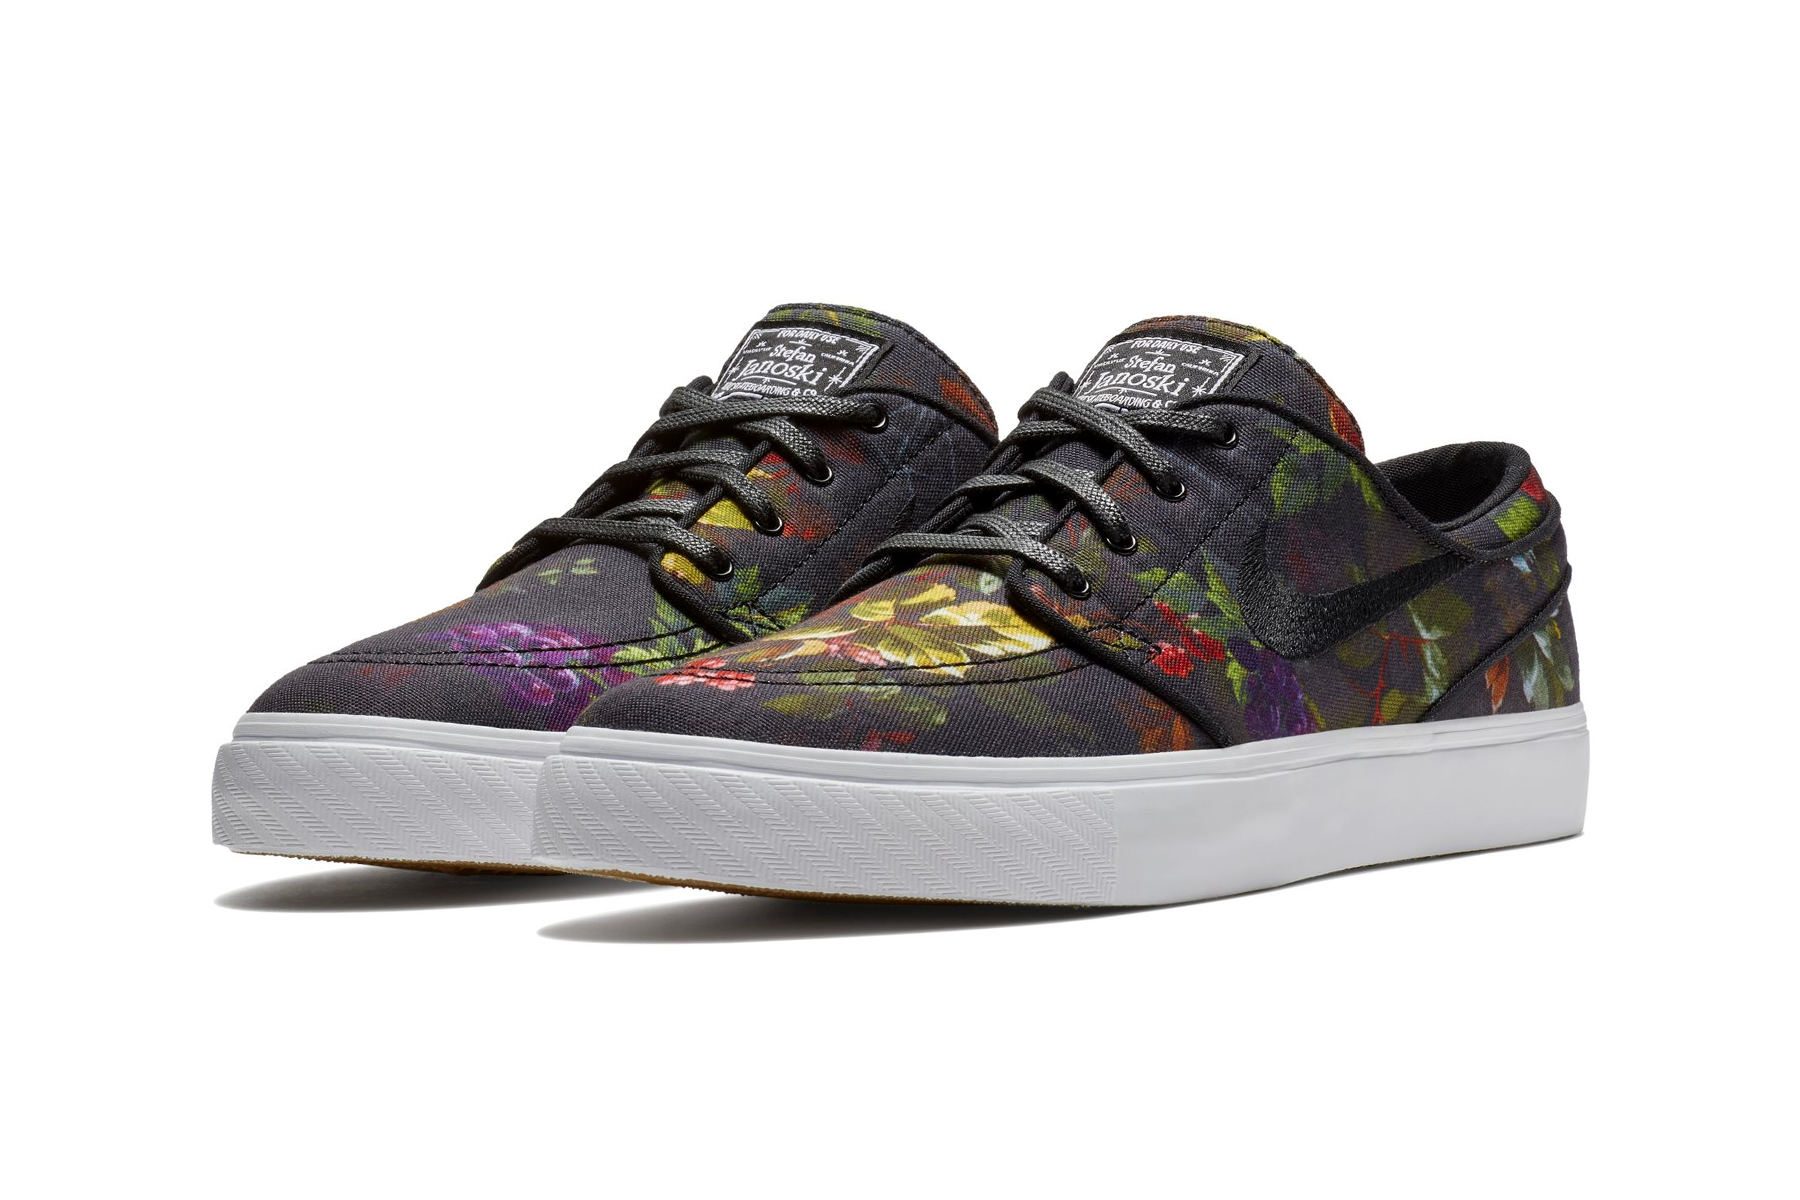 Conceited curl Brace Nike SB Zoom Stefan Janoski "Floral Canvas" | Drops | Hypebeast